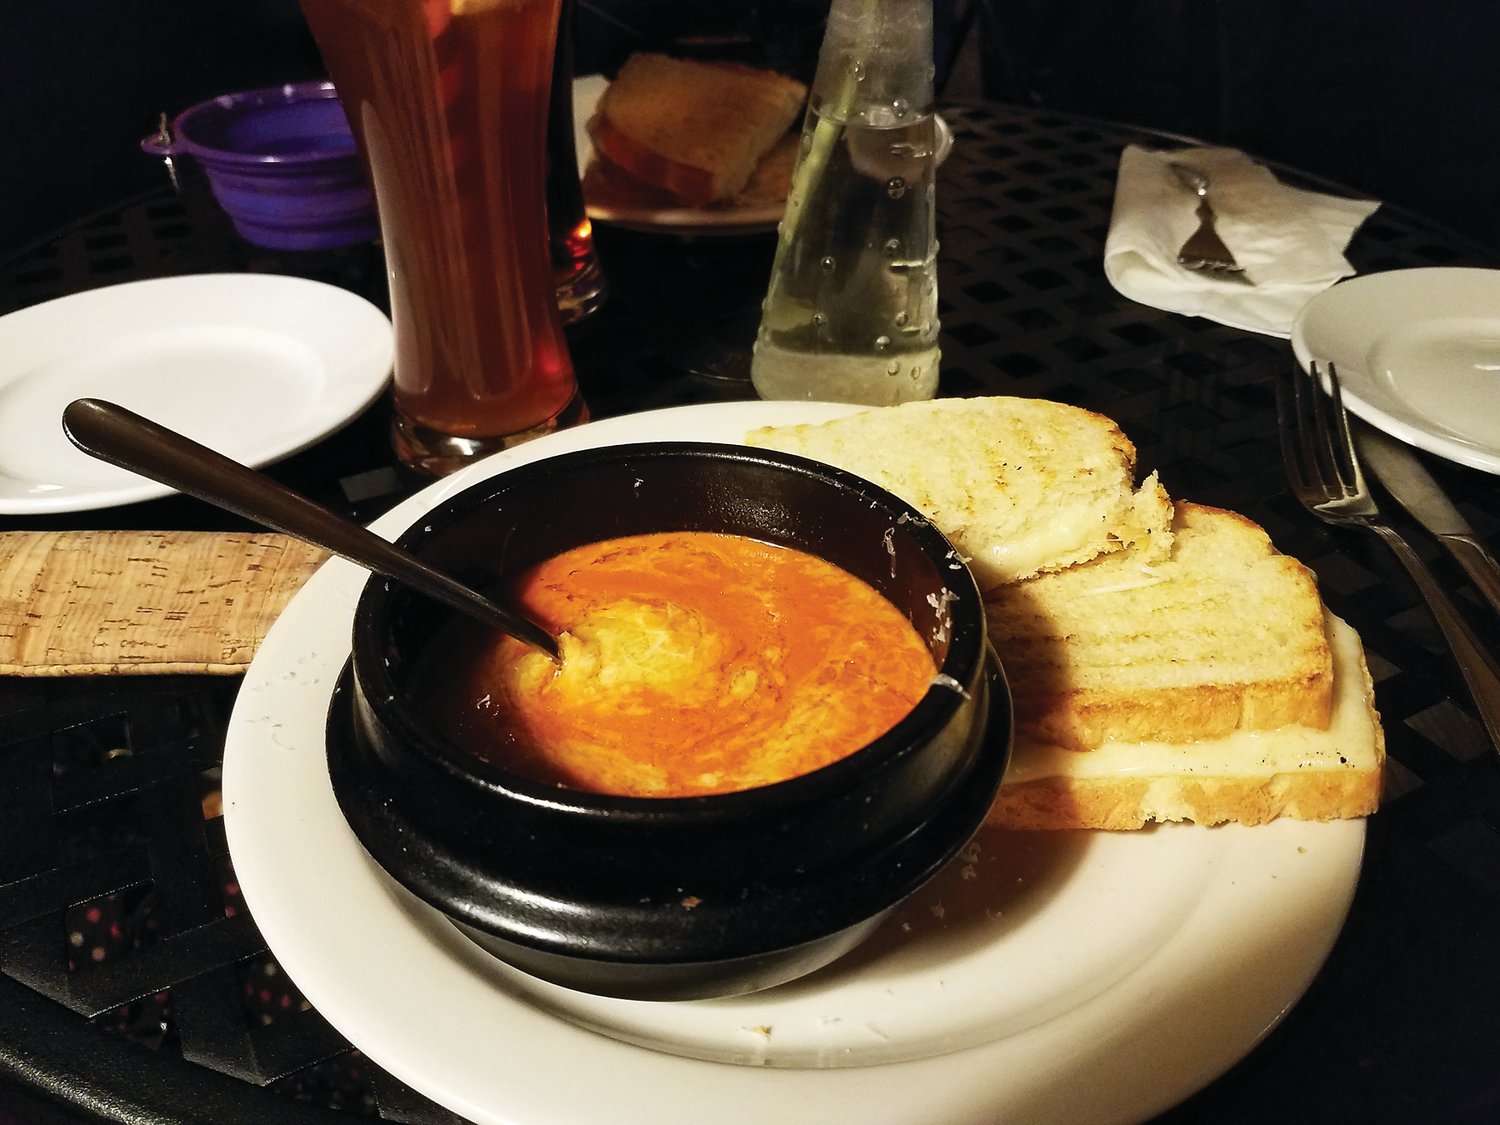 If Black Friday or Small Business Saturday bring you to Doylestown’s shopping district, a bowl of tomato bisque and a grilled cheese sandwich at Andre’s Wine & Cheese Shop may provide sustenance during a busy day. Photograph by Susan S. Yeske.